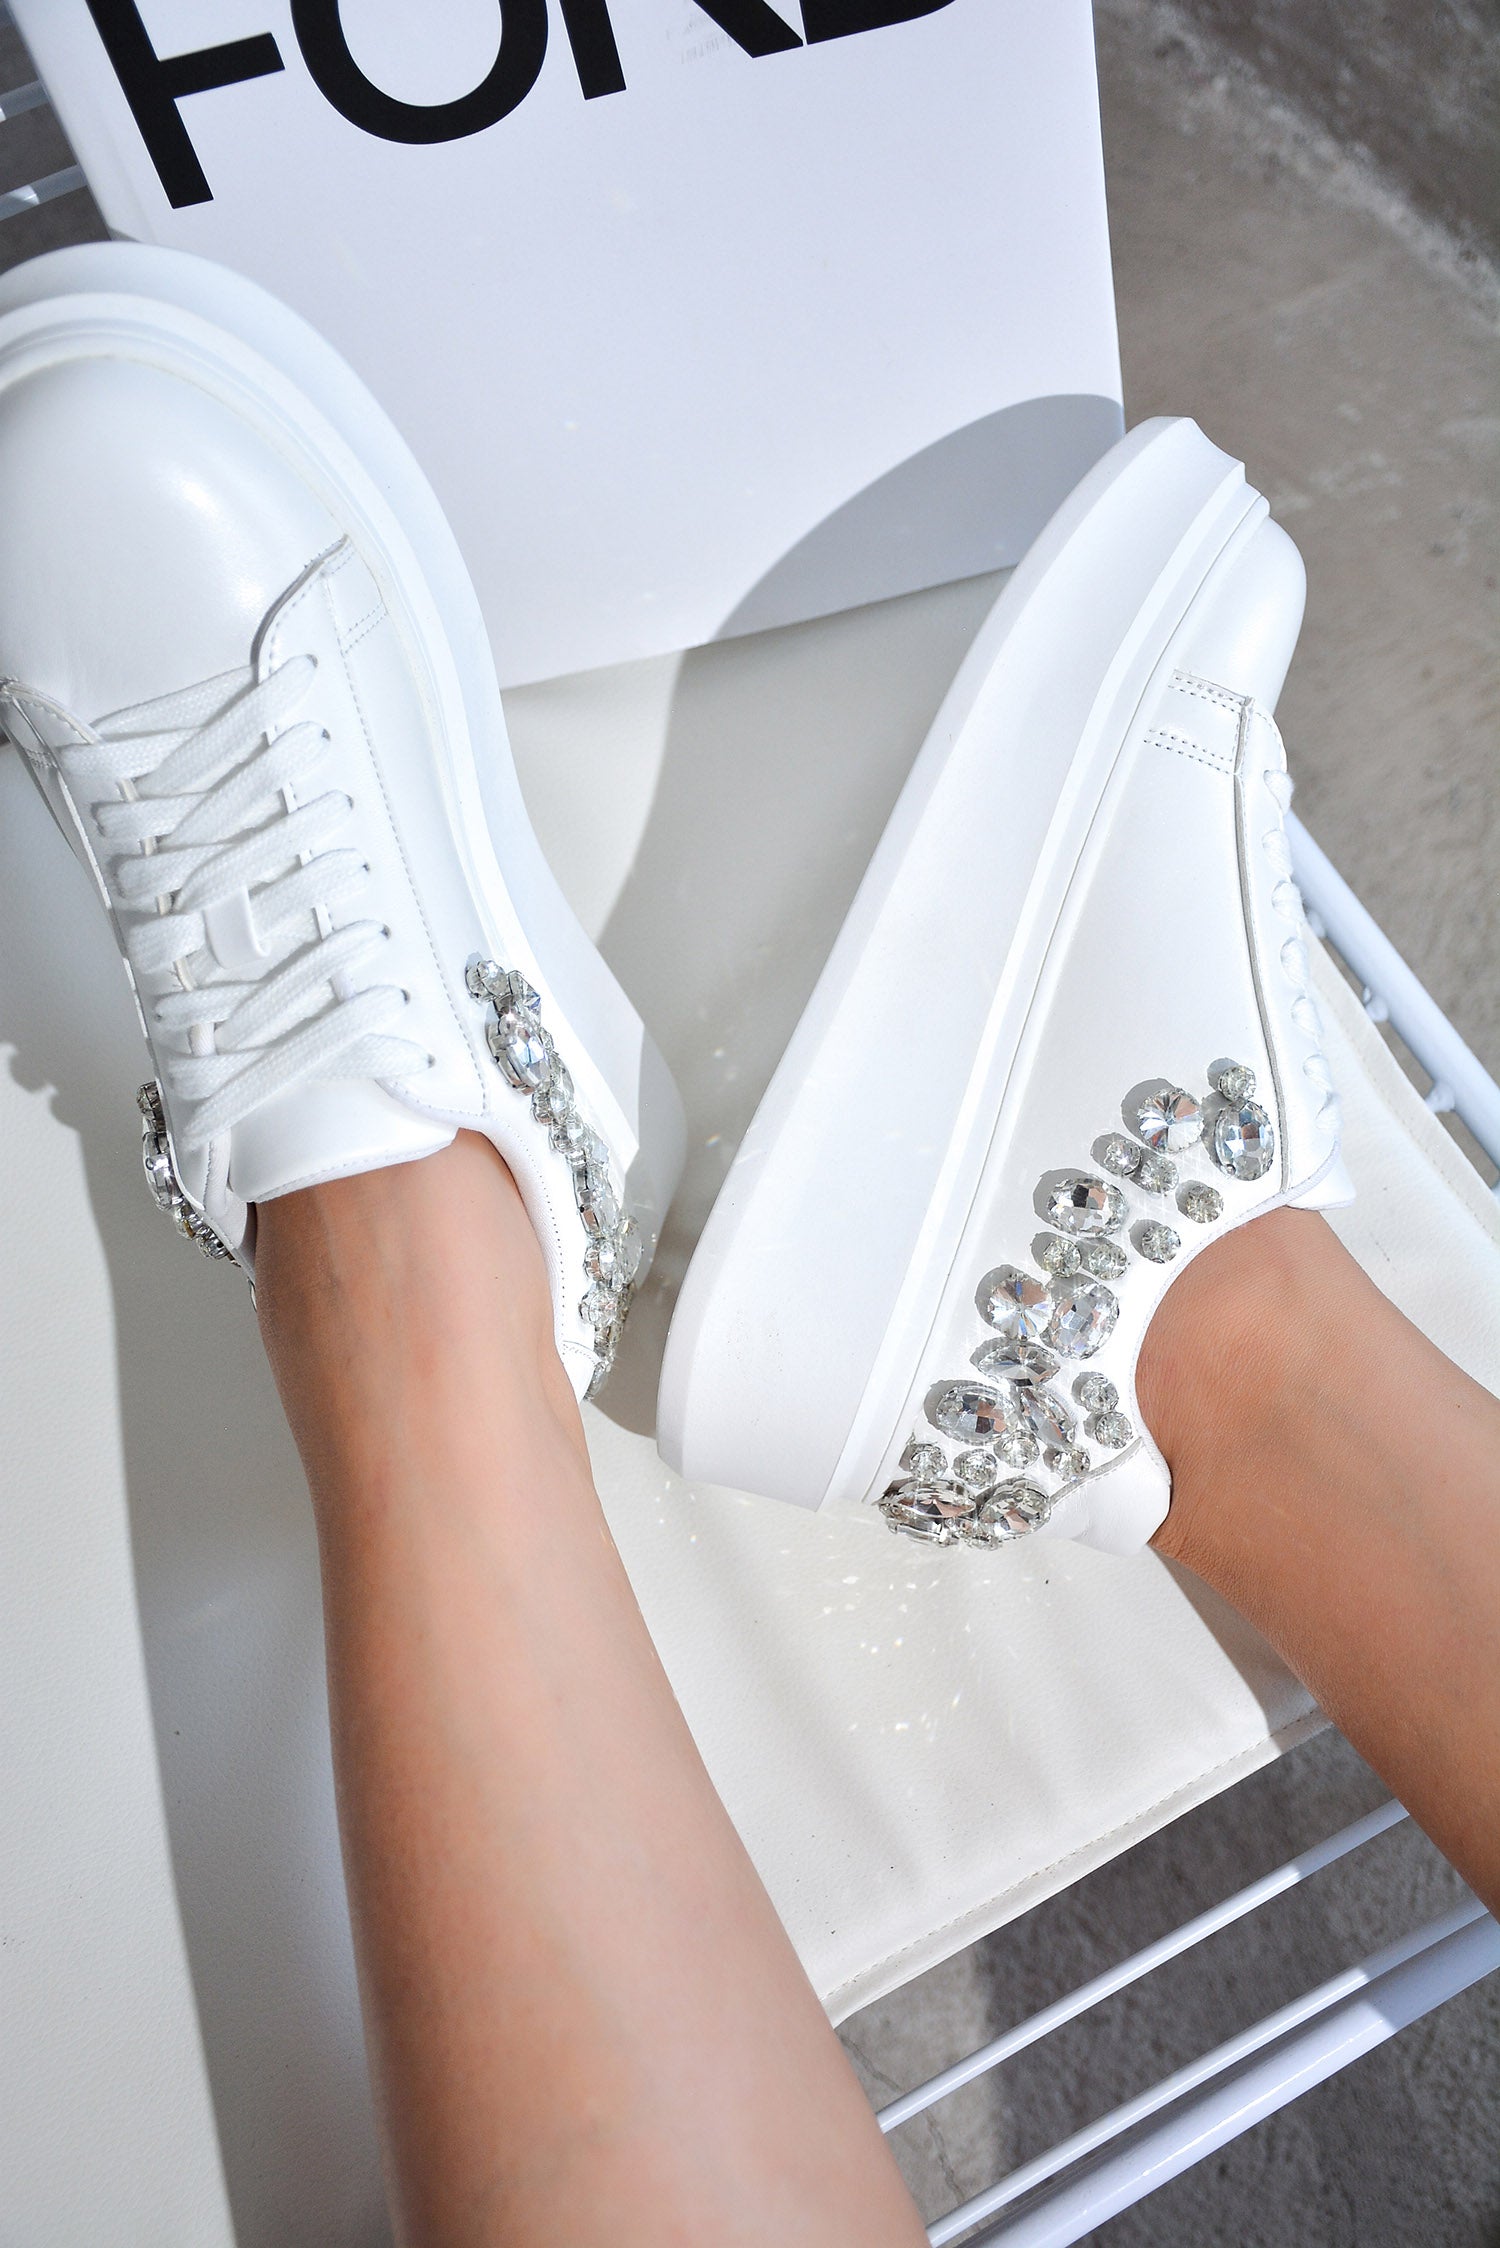 Cape Robbin - BLING QUEEN - WHITE - SNEAKERS